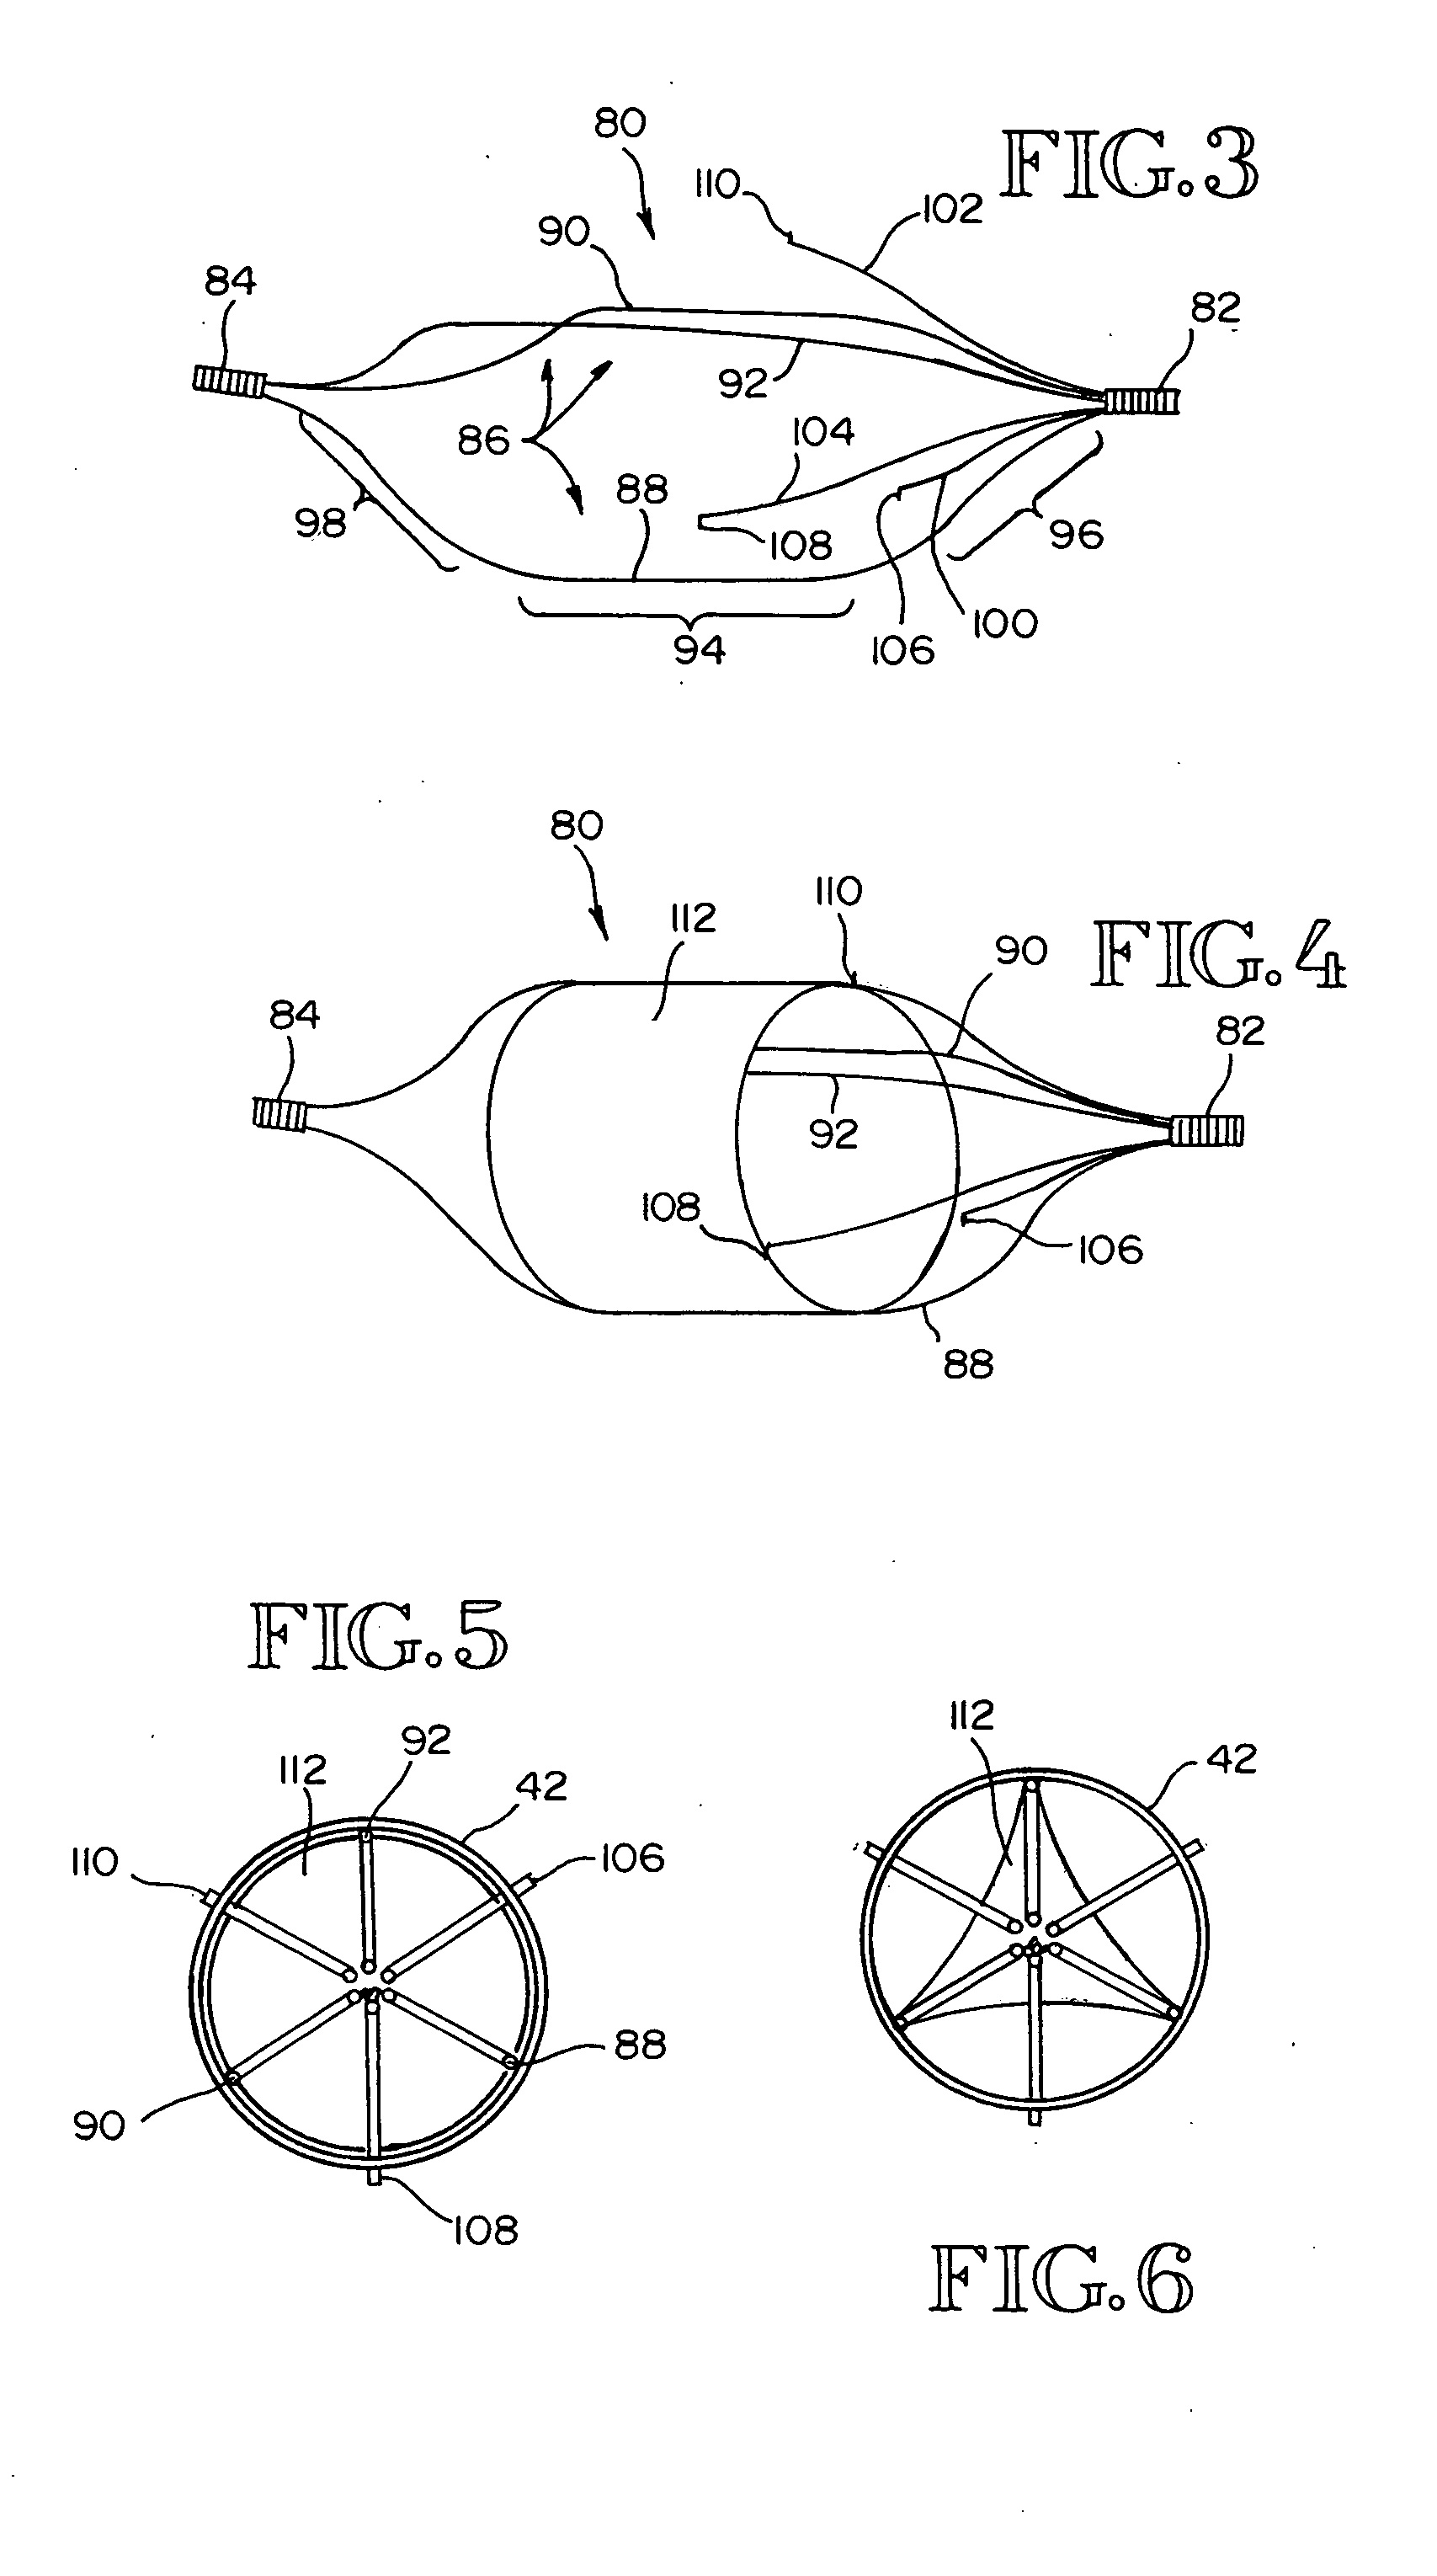 Intra-bronchial valve devices